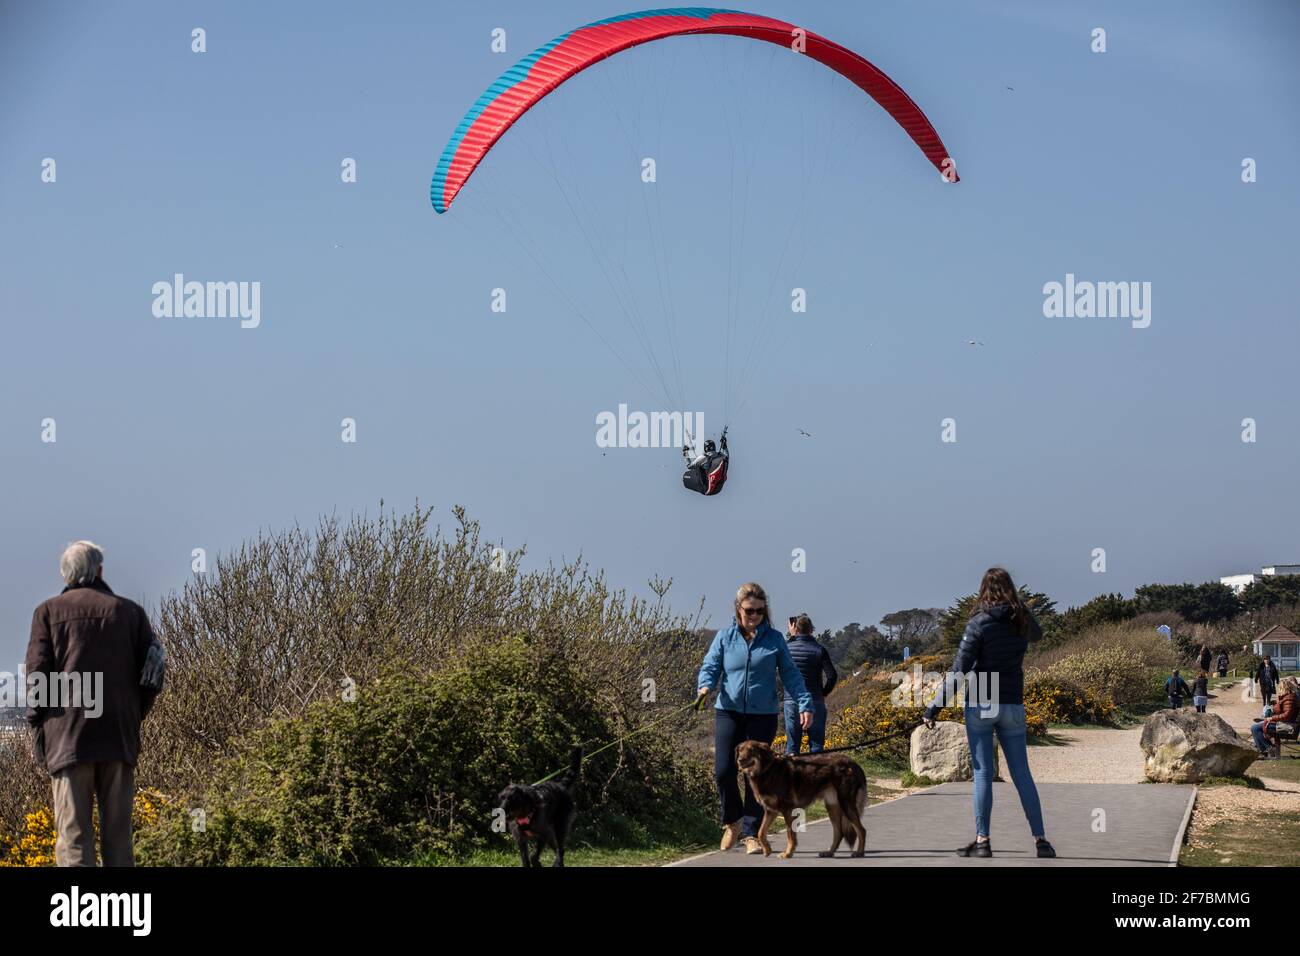 Paragliders take flight over Highcliffe beach during a windy day along the South West Coastline of the English Riviera, Dorset, England,United Kingdom. Stock Photo